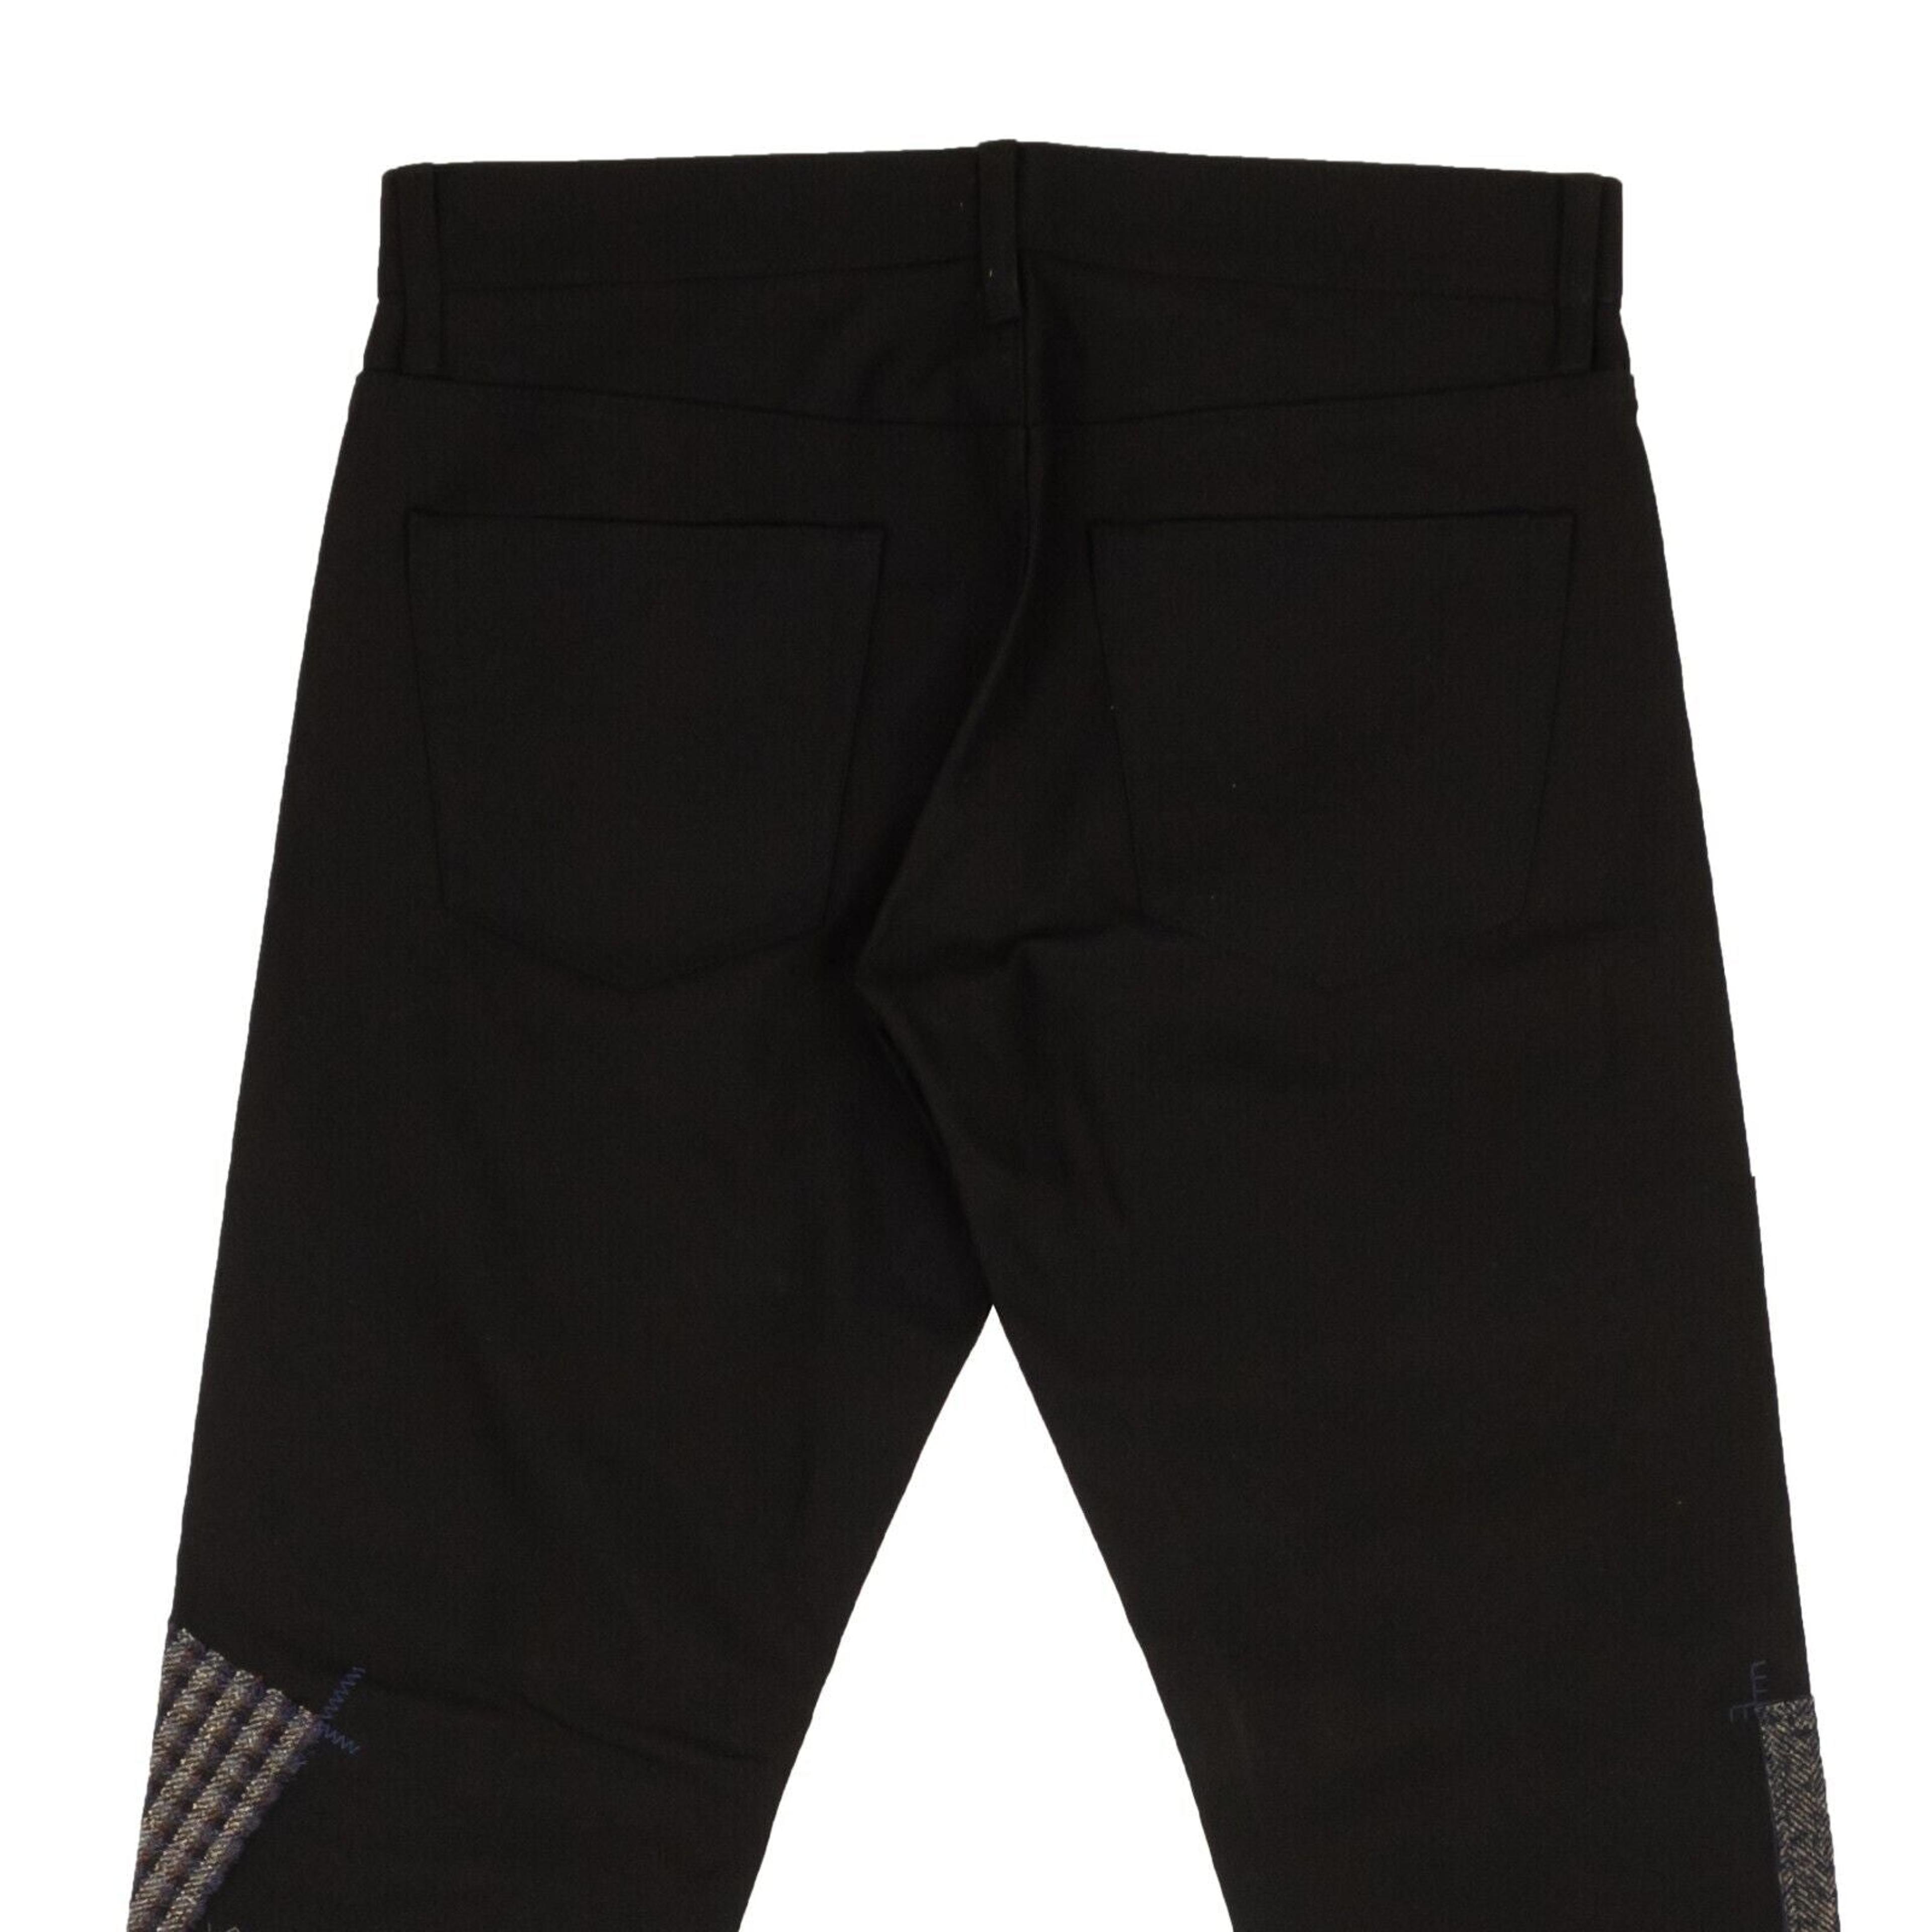 Alternate View 3 of Black Polyester Patchwork Throughout Pants